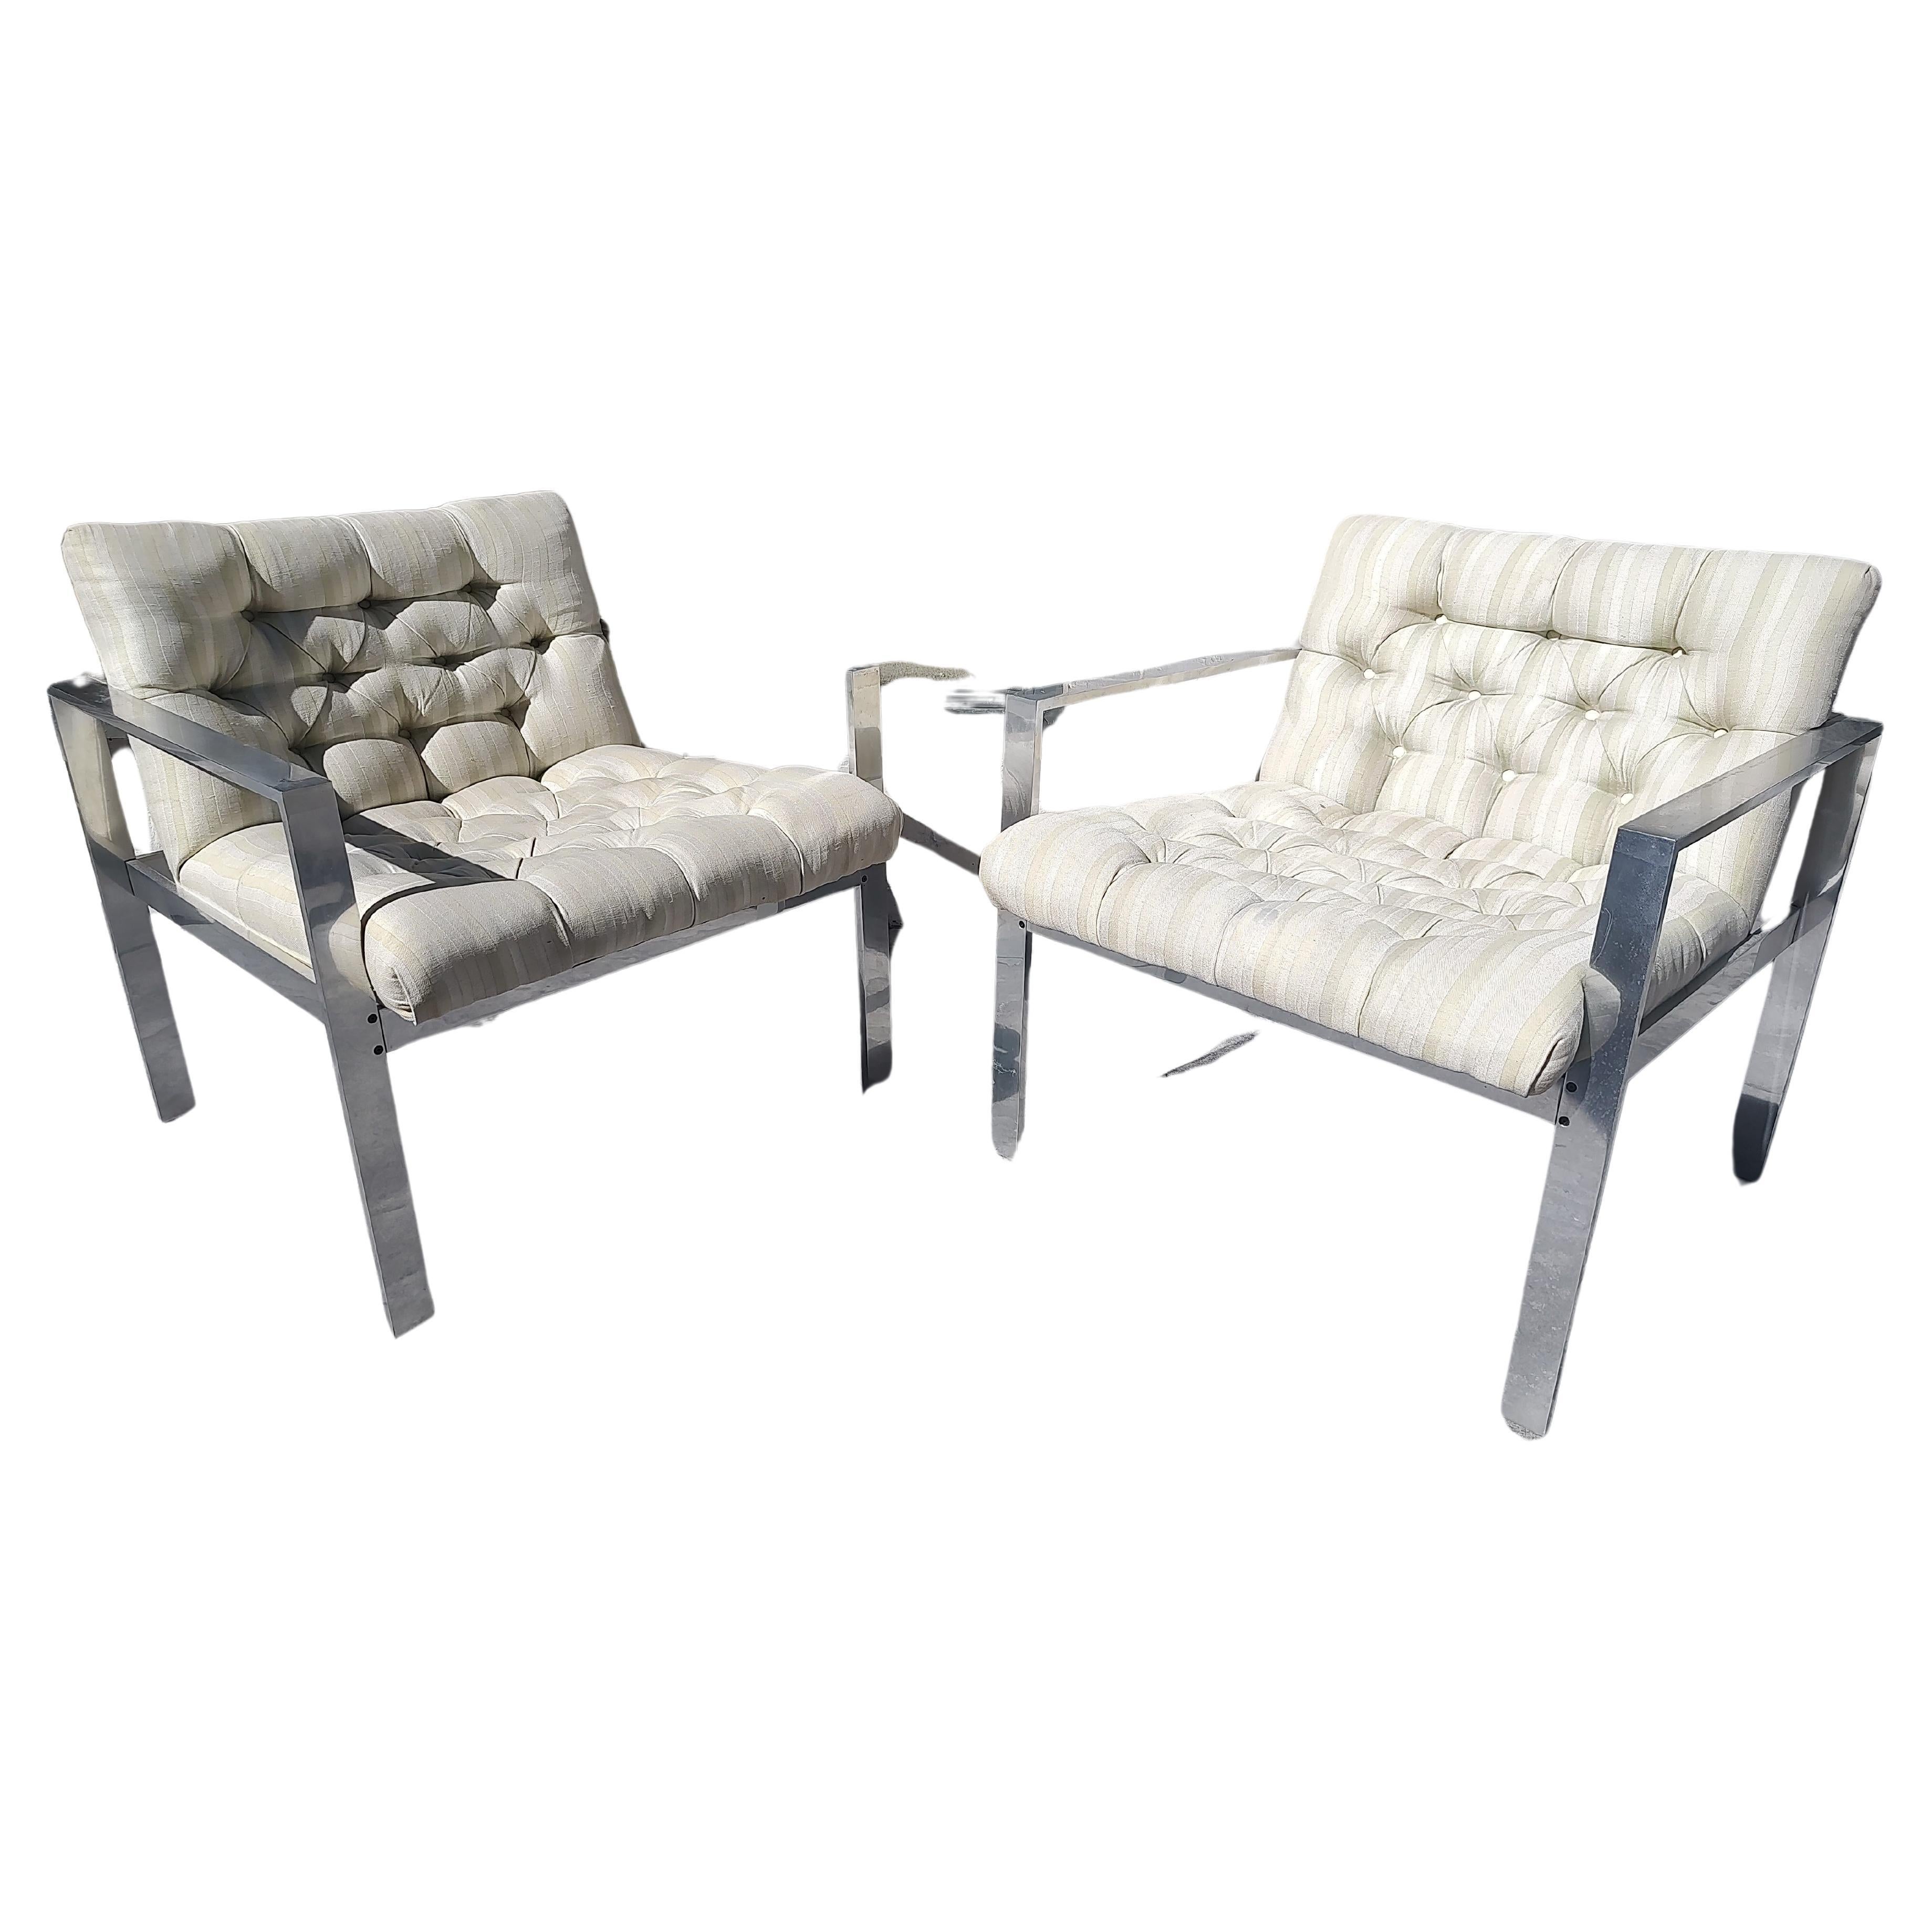 Pair of Mid-Century Modern Tufted Aluminum Lounge Chairs by Harvey Probber For Sale 3